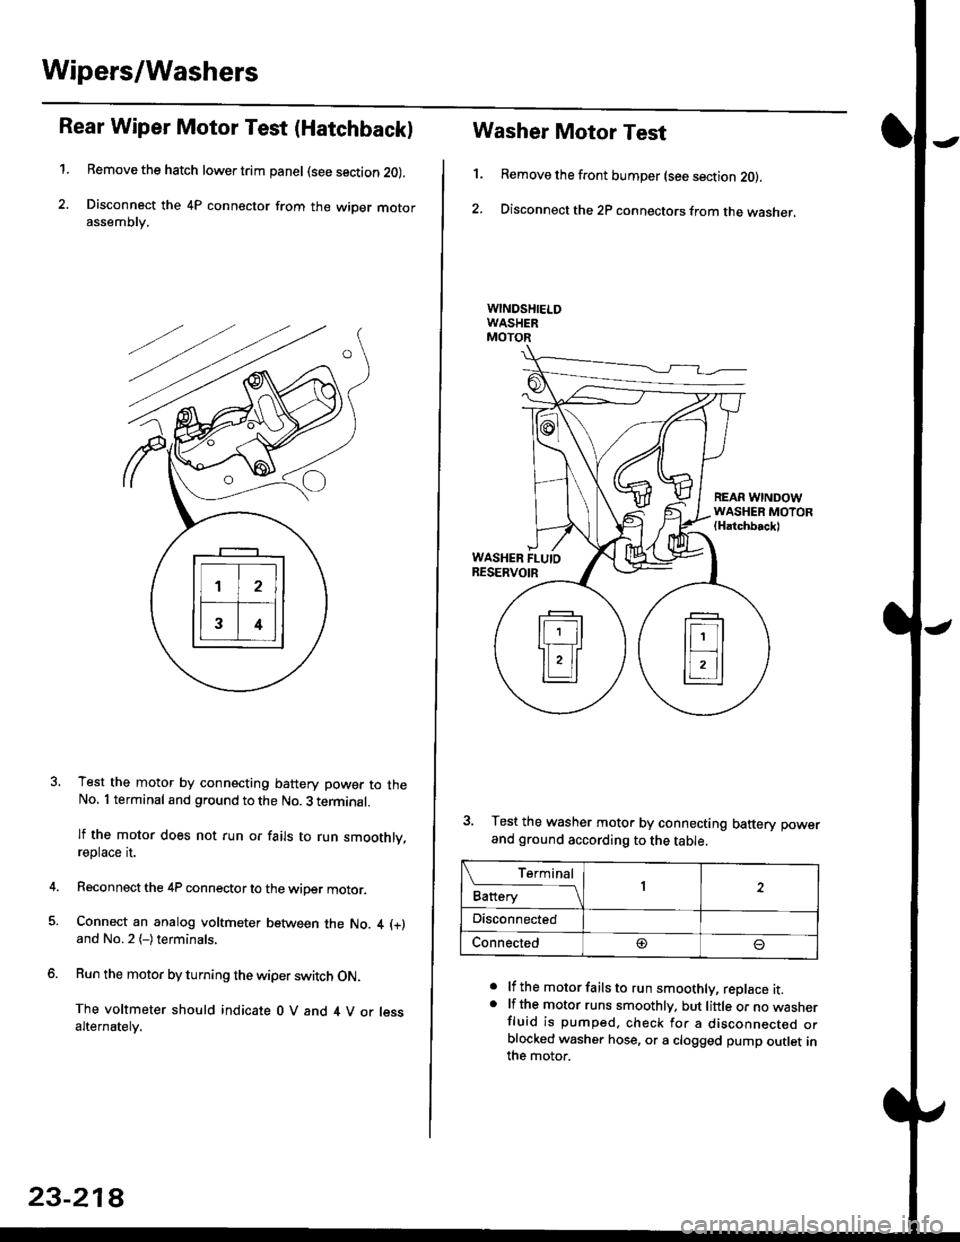 HONDA CIVIC 1996 6.G Owners Manual Wipers/Washers
Rear Wiper Motor Test (Hatchback)
1.Remove the hatch lower trim panel (see section 20).
Disconnect the 4P connector from the wiper motorassemDry,
Test the motor by connecting battery po